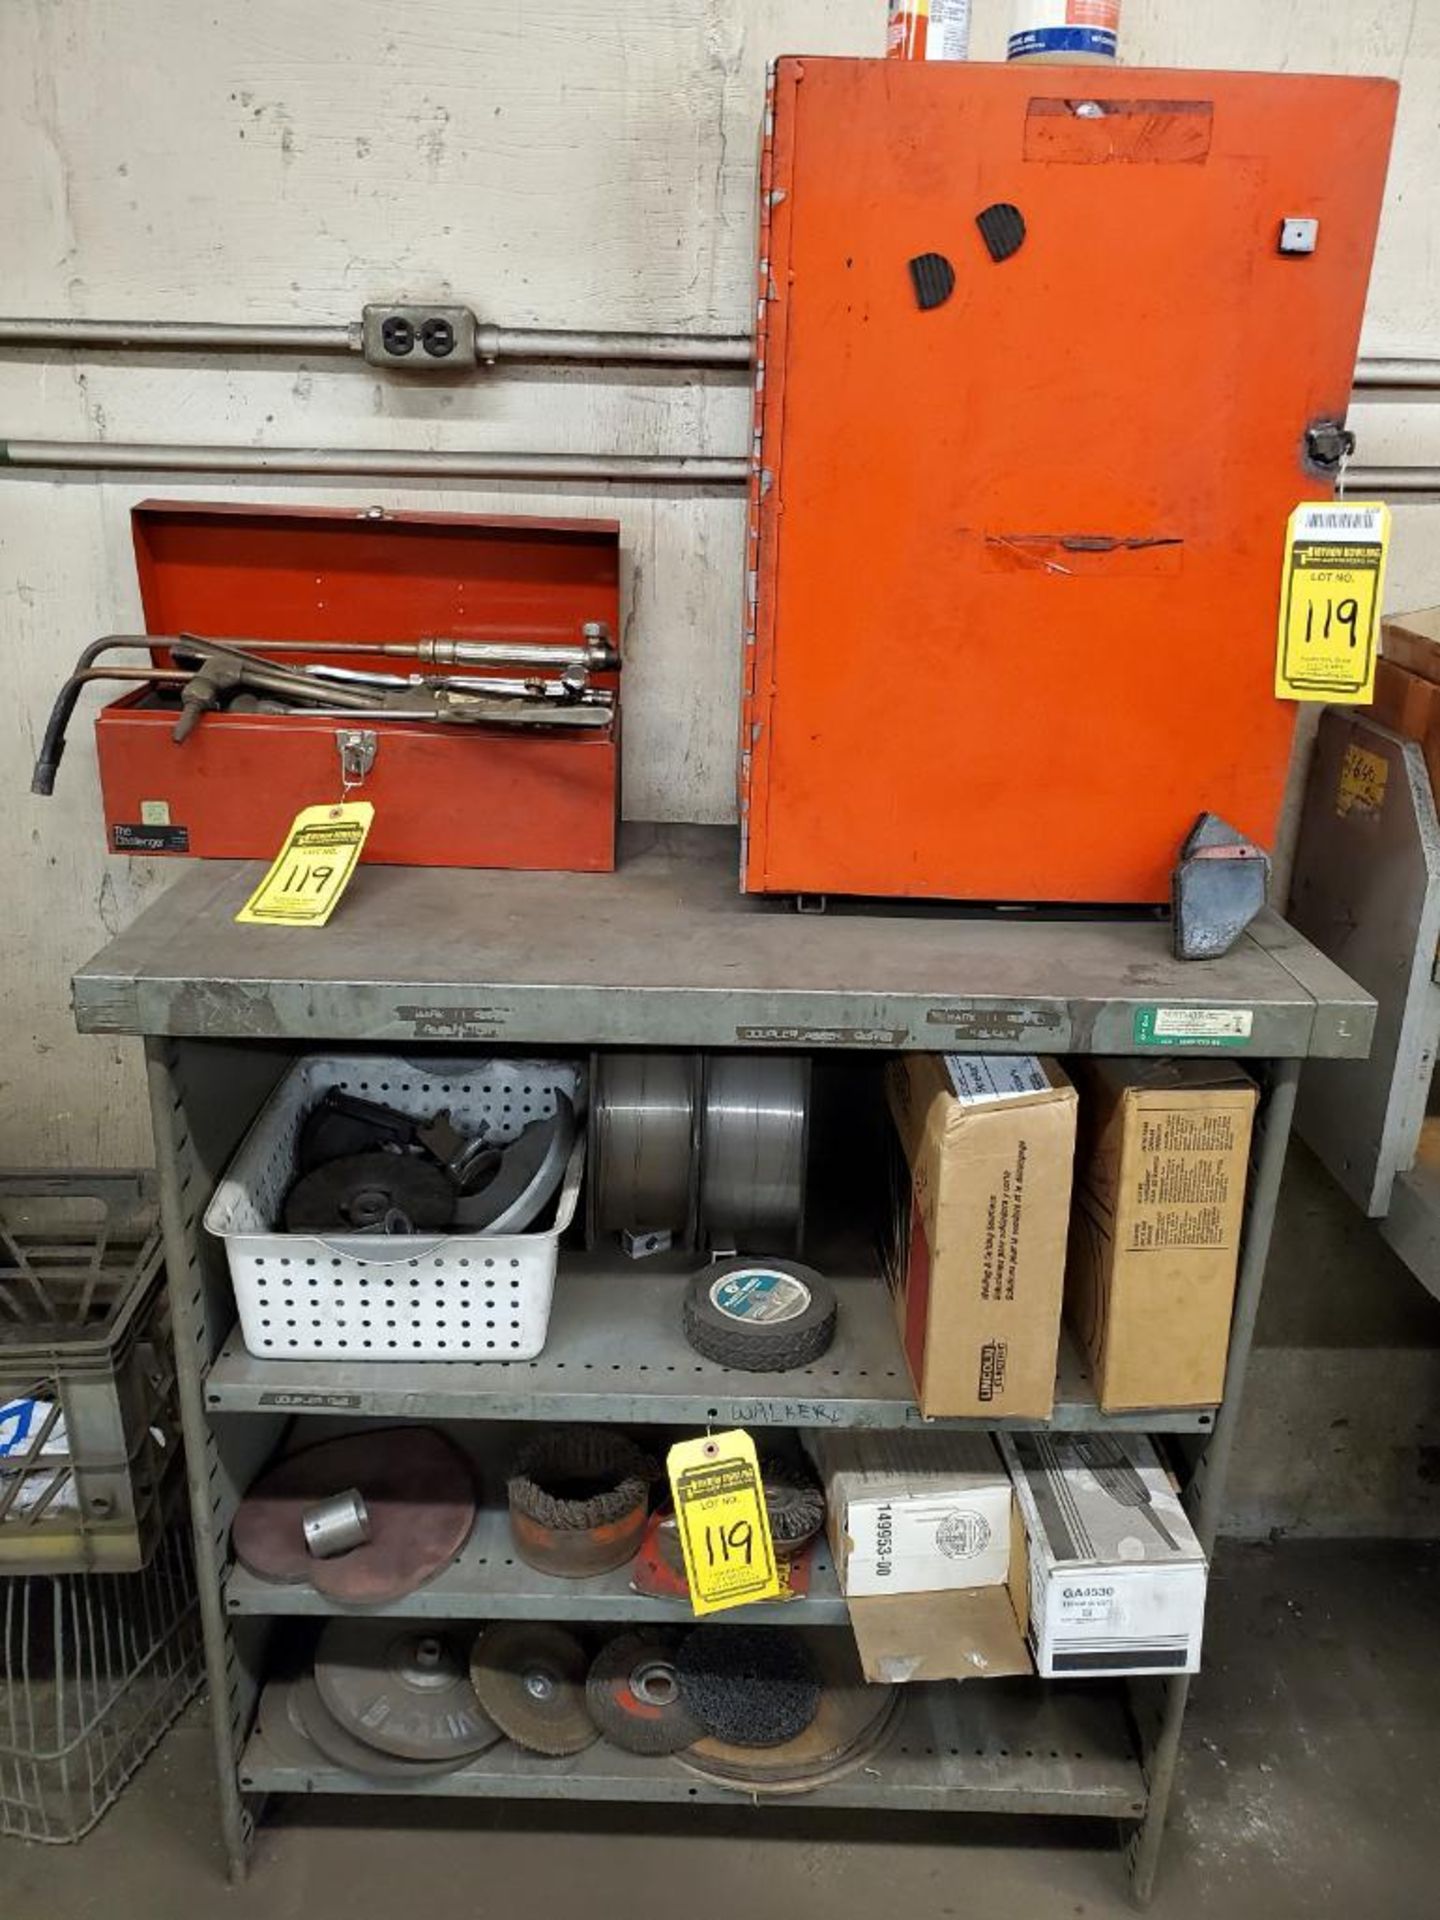 LOT OF WELDING SUPPLIES - PICLE1 TRACK WELDER, TORCH CUTTING HEADS, WELDING WIRE, ABRASIVES, STEEL C - Image 2 of 7